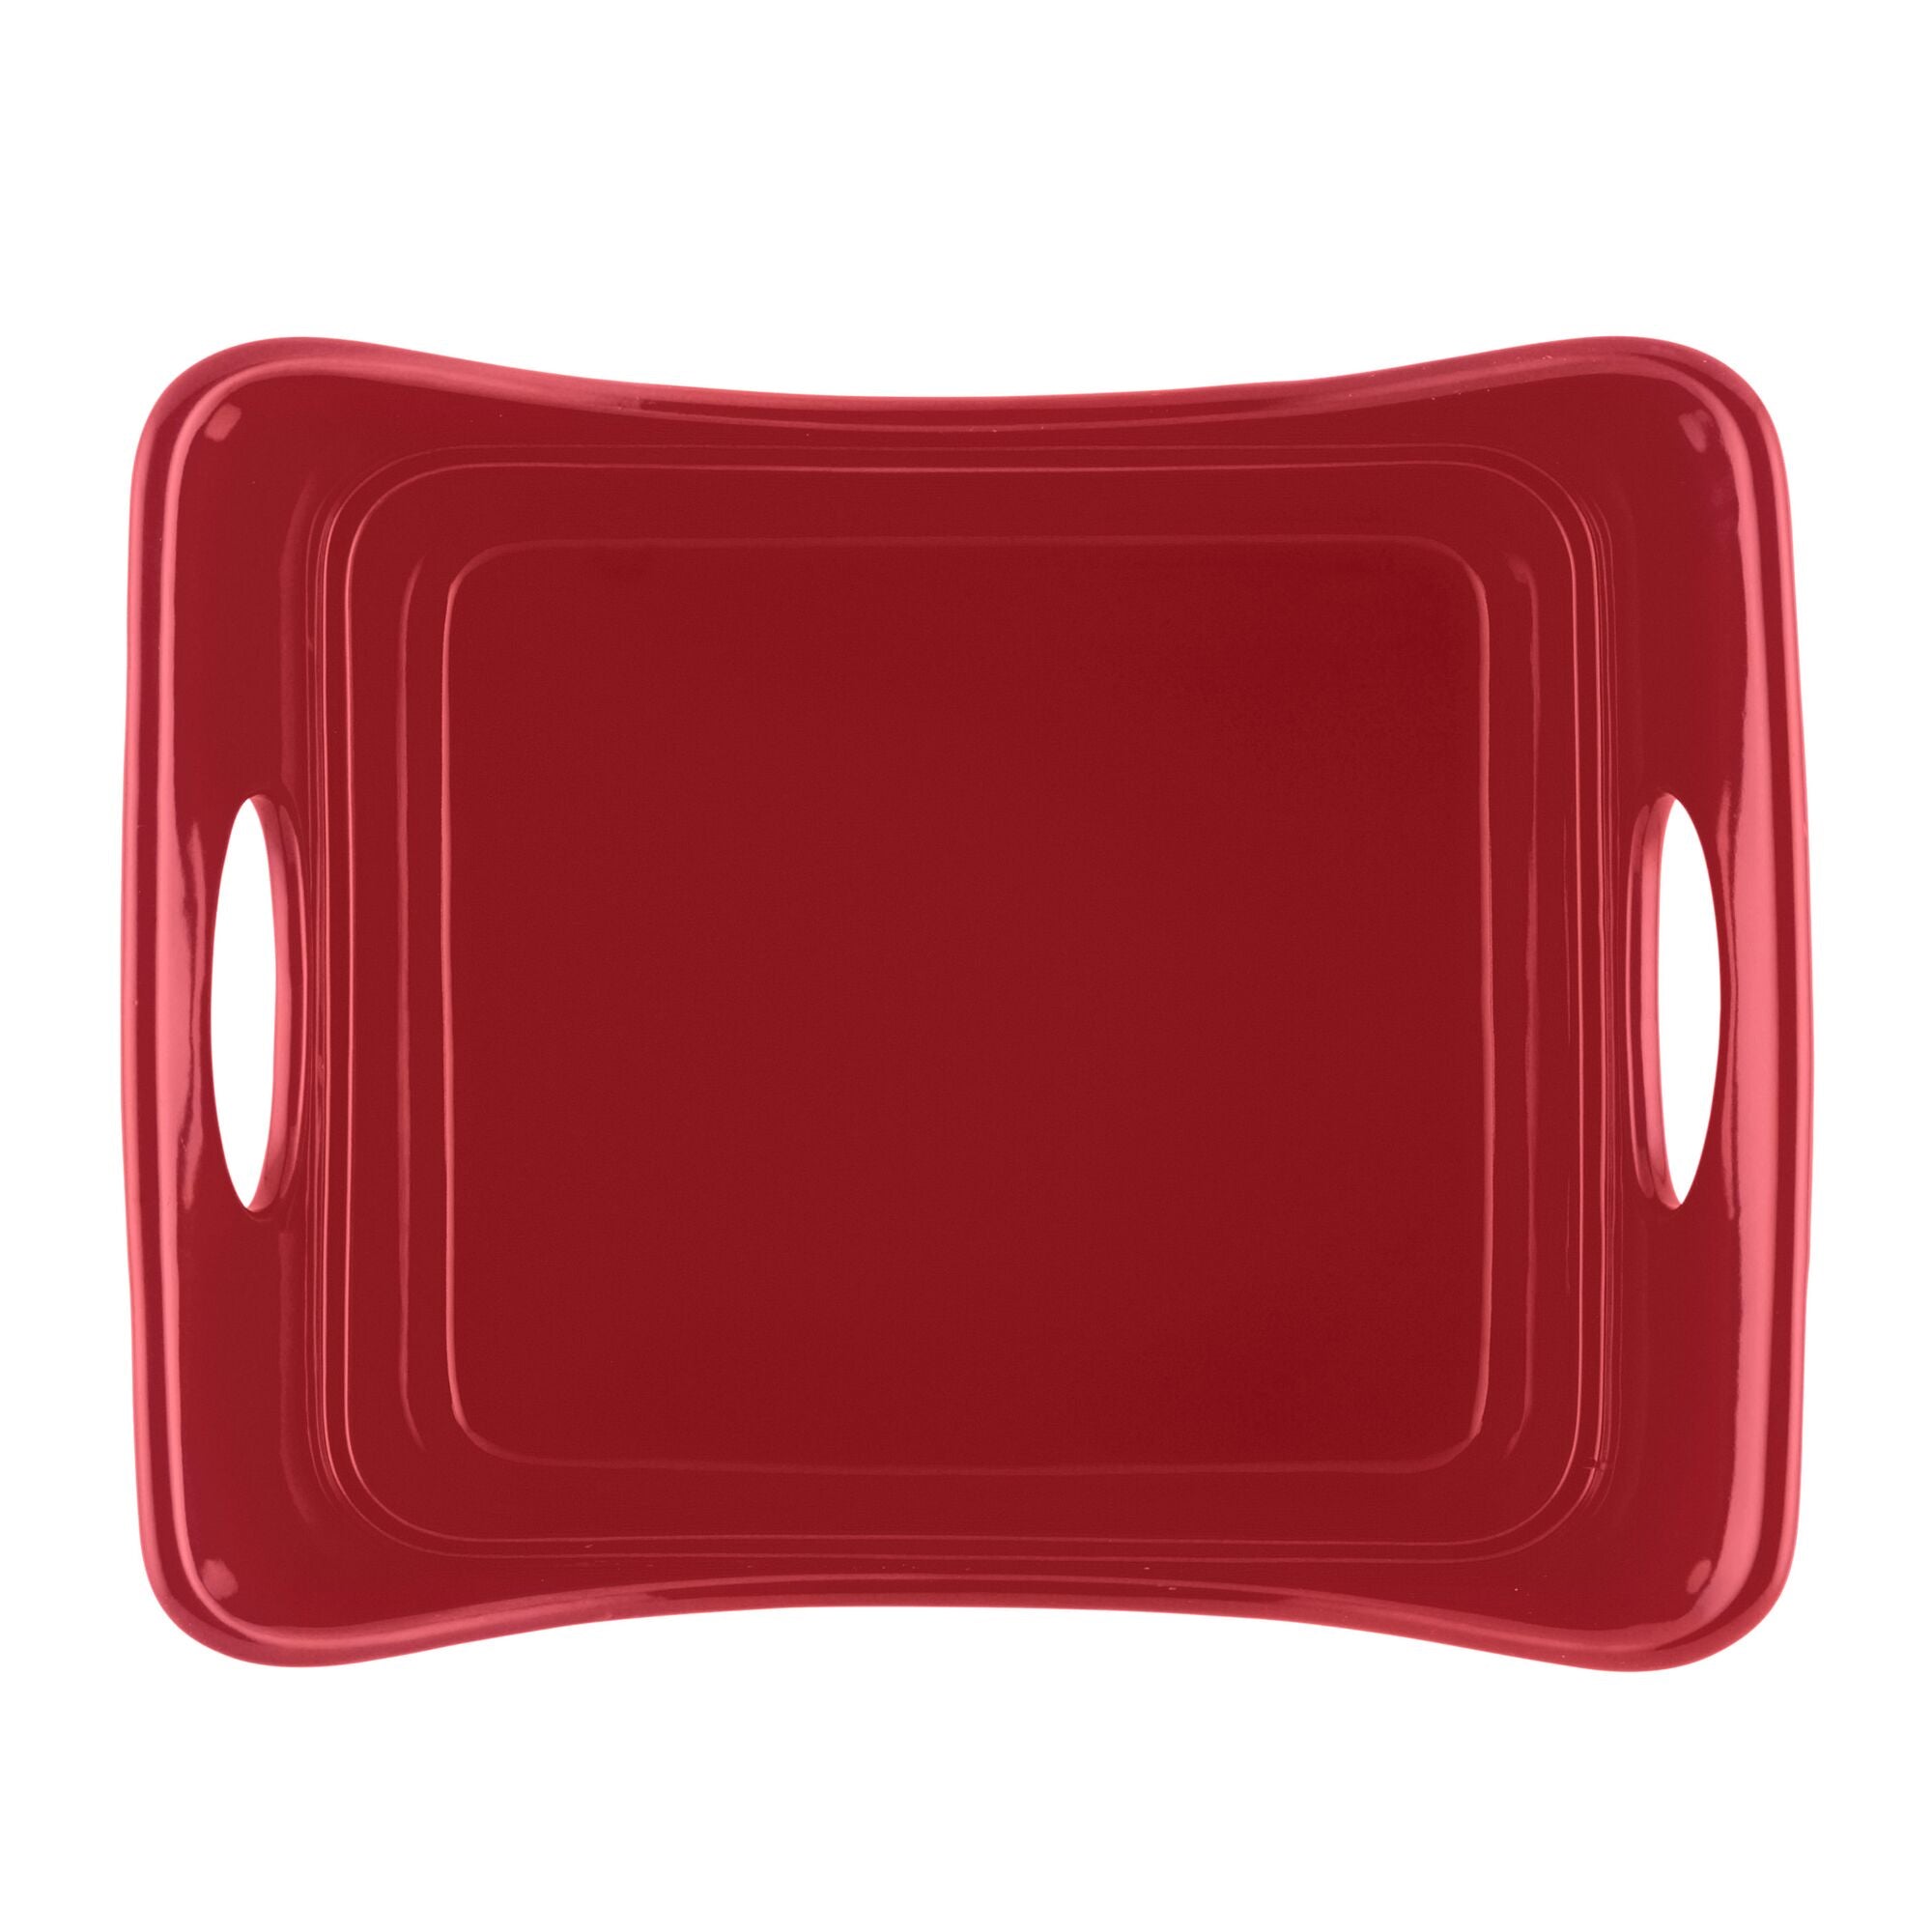 Large Ceramic Casserole Dish with Lid, 4.0 Quart Covered Rectangular  Stoneware Baking Dishes for Oven, Deep 9x13 Inch Lasagna Pans for Baking  and Serving, Red 